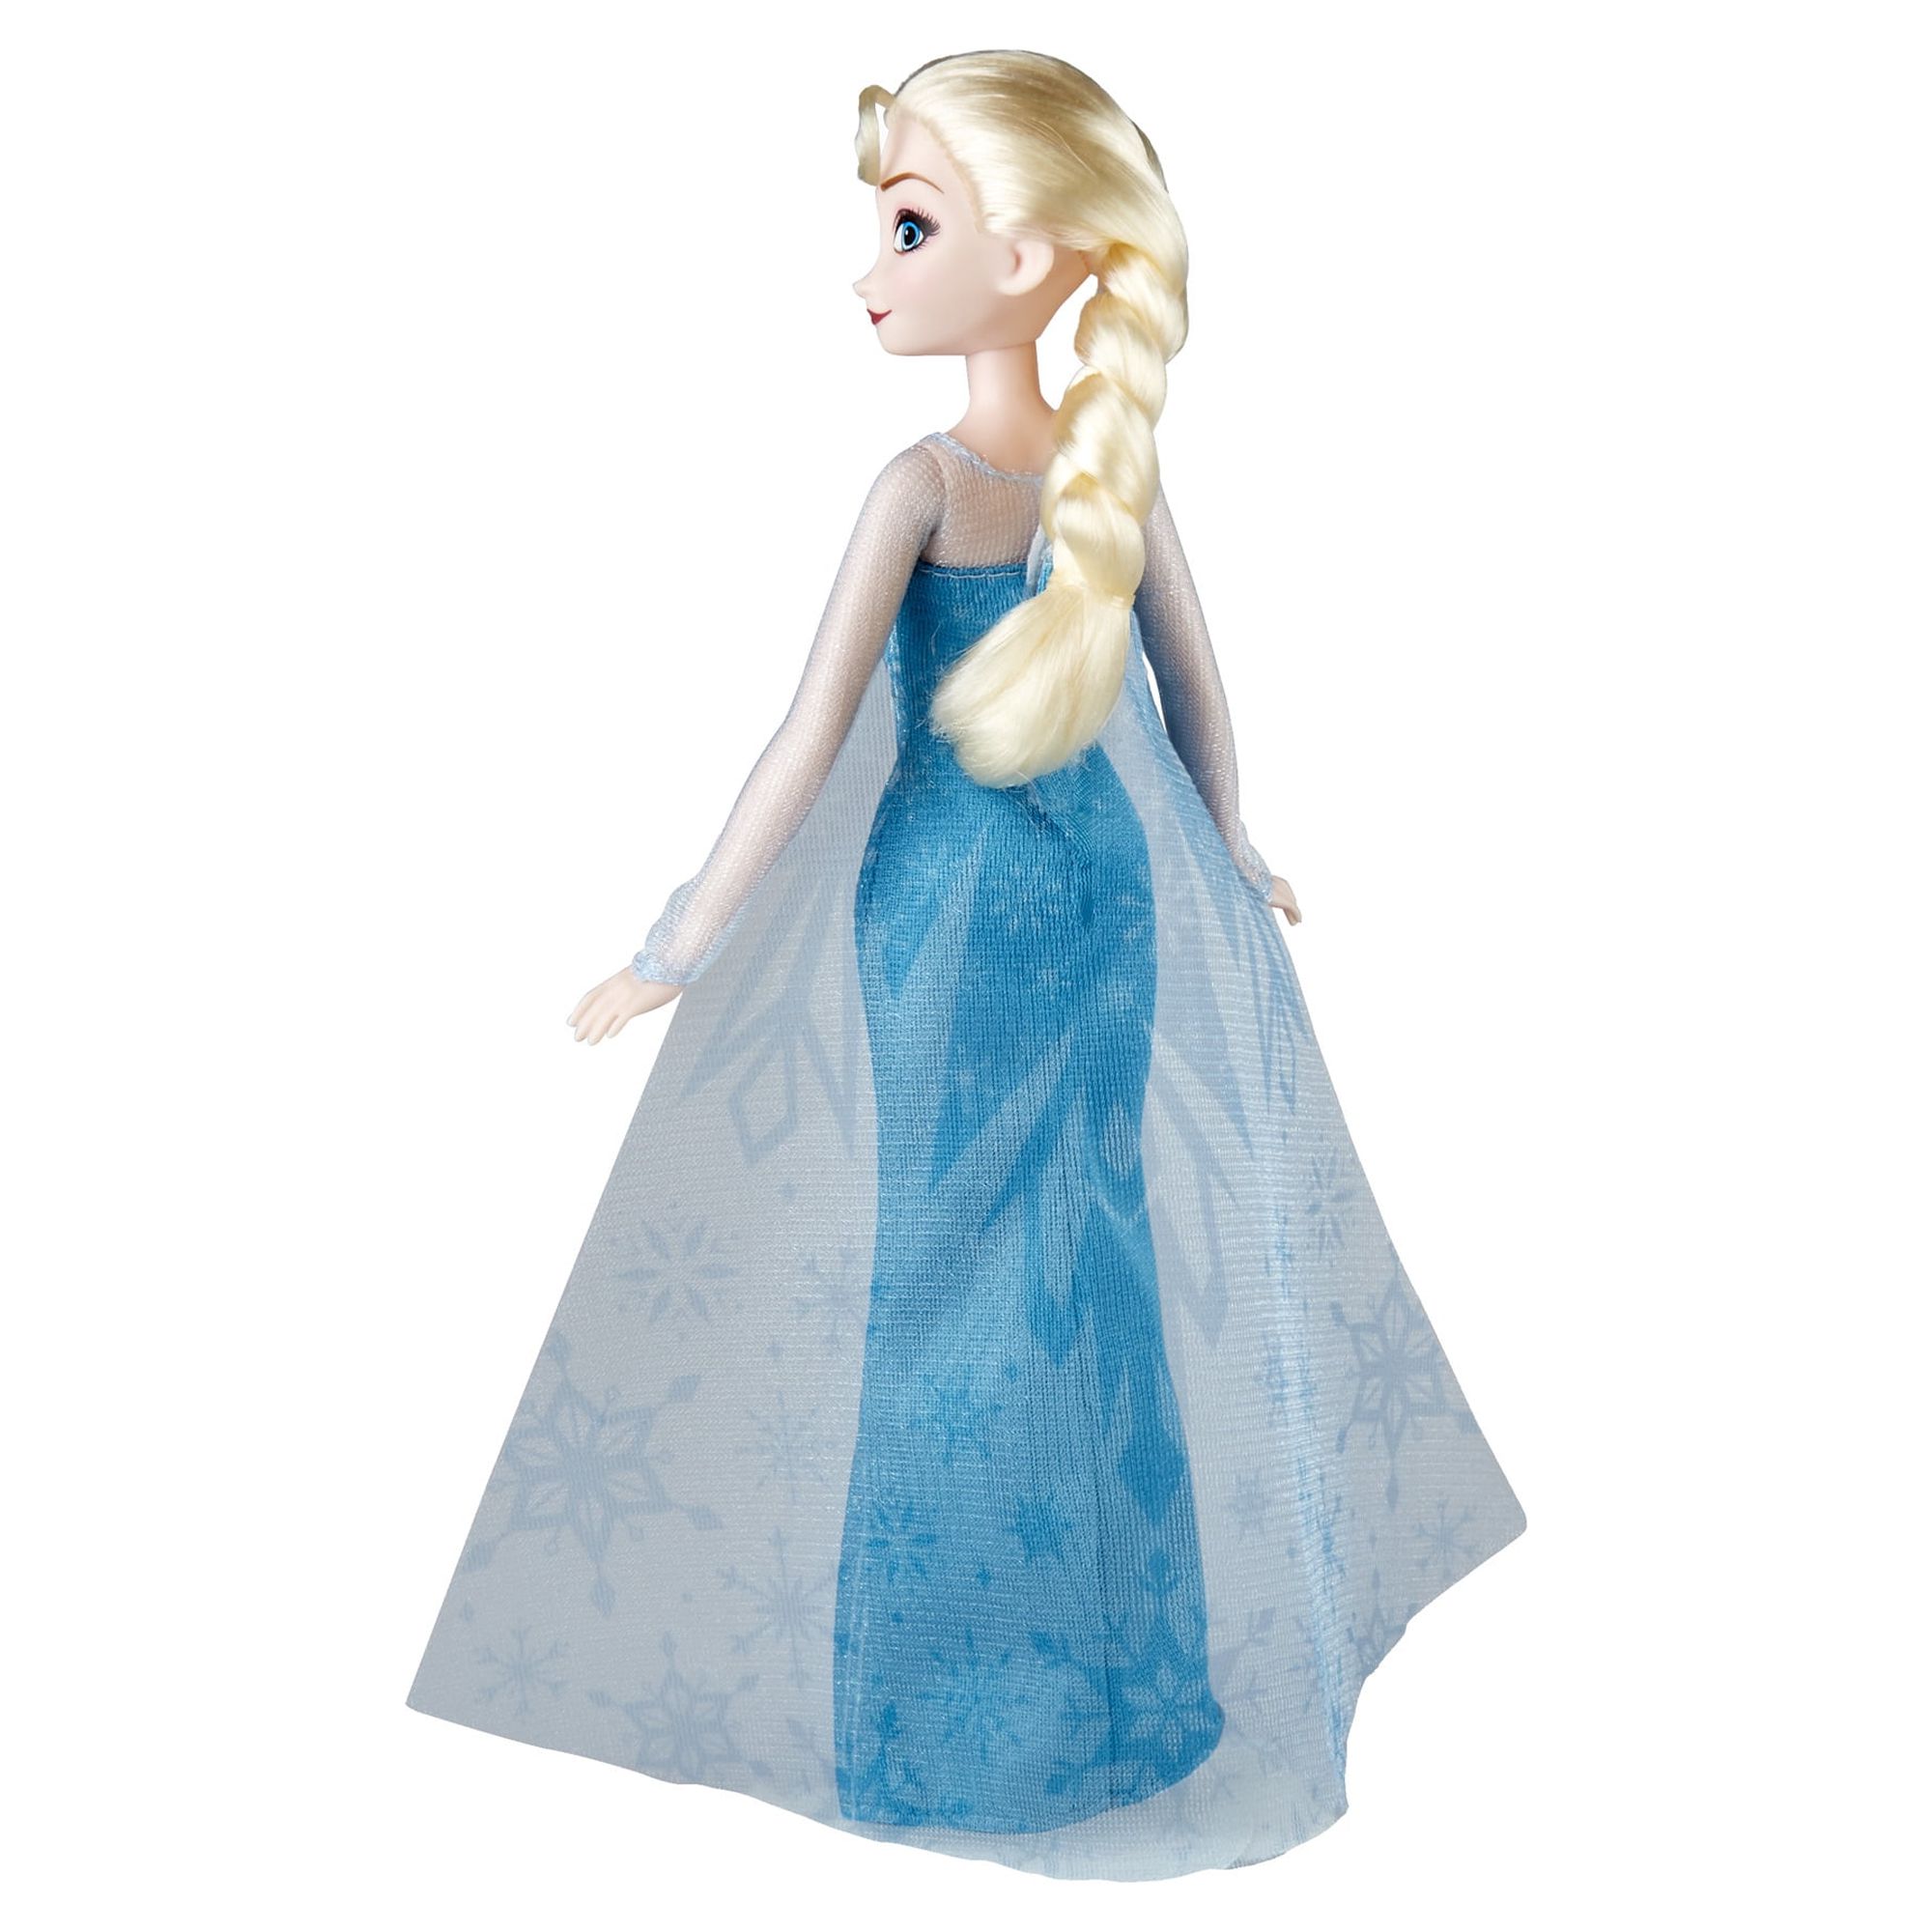 Disney Frozen Classic Fashion Elsa, for Kids Ages 3 and up, Includes Outfit and Shoes - image 5 of 7